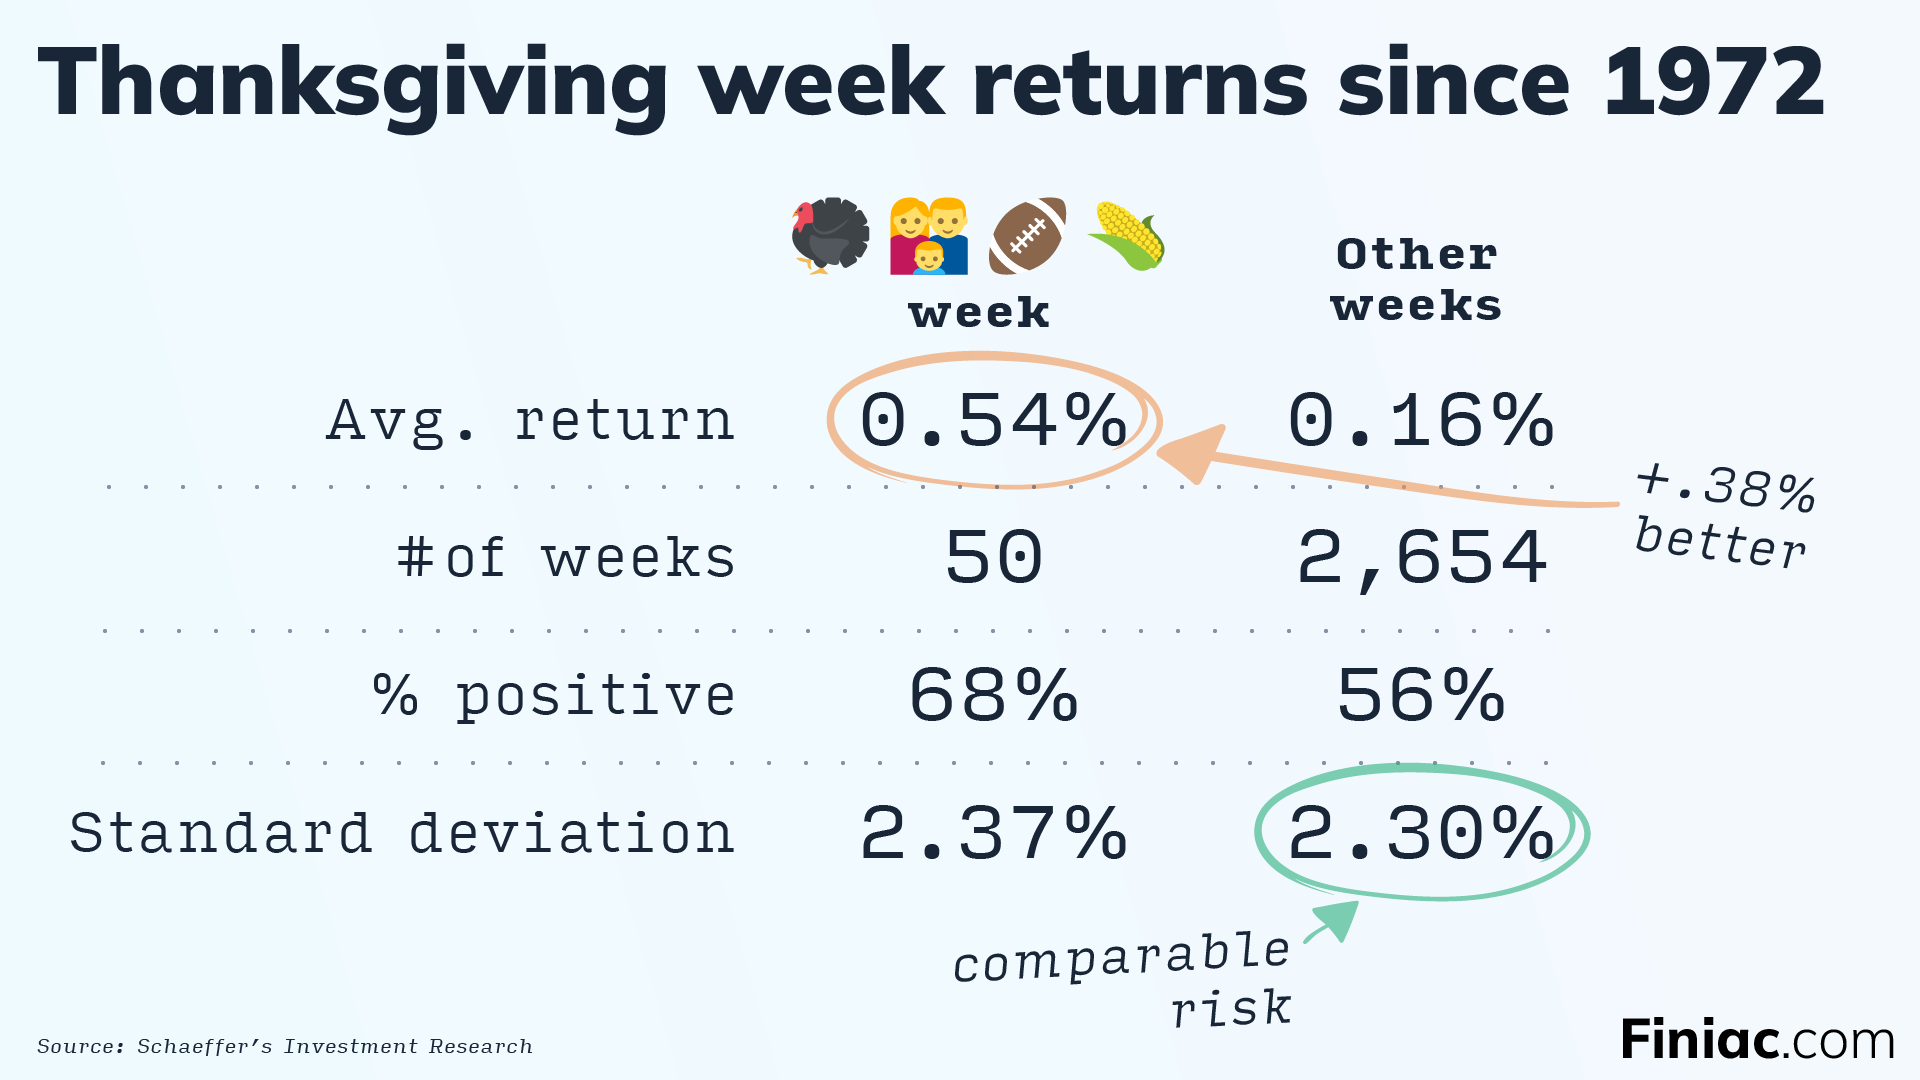 Table showing stock market returns during the week of Thanksgiving compared to the rest of the year, with data since 1972.